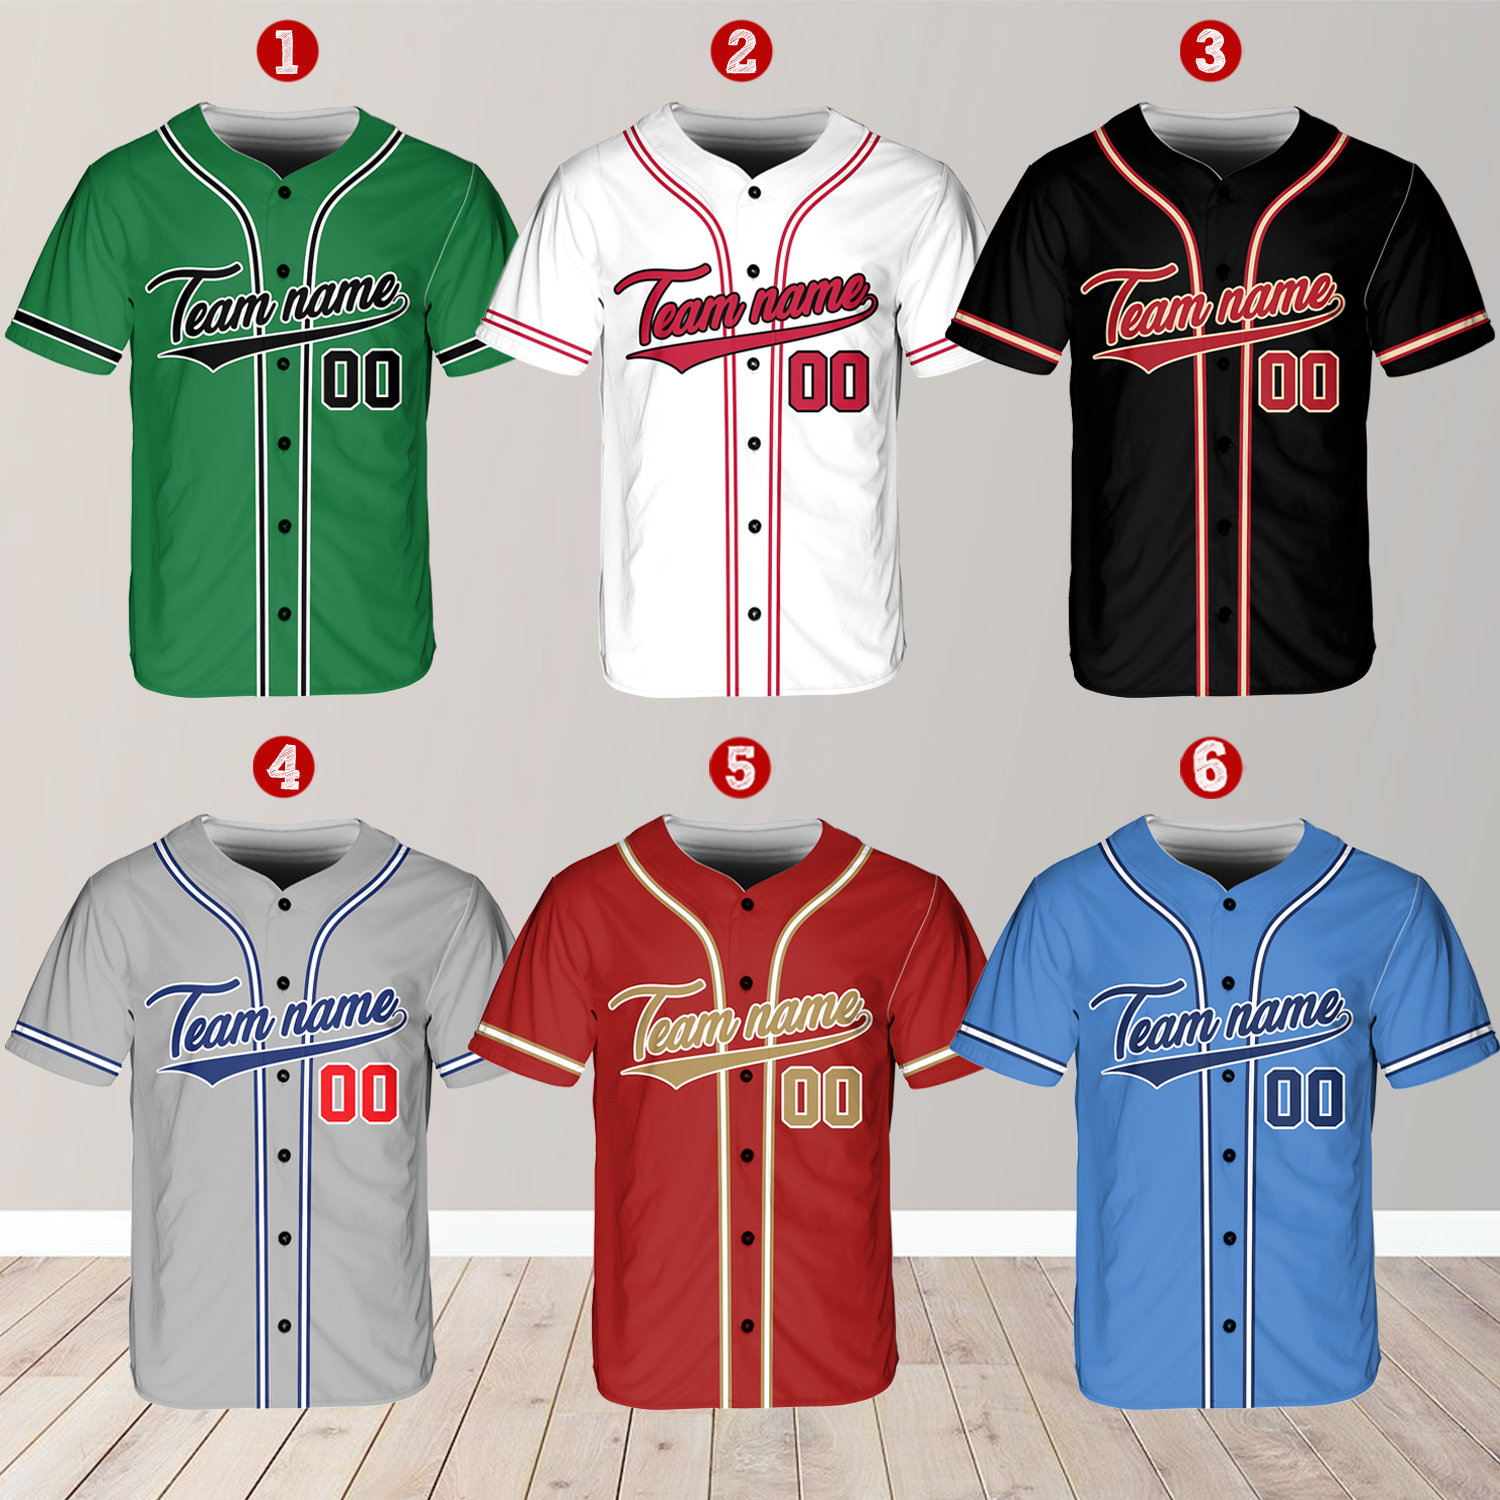  Customized Baseball Jersey with Any Name and Number